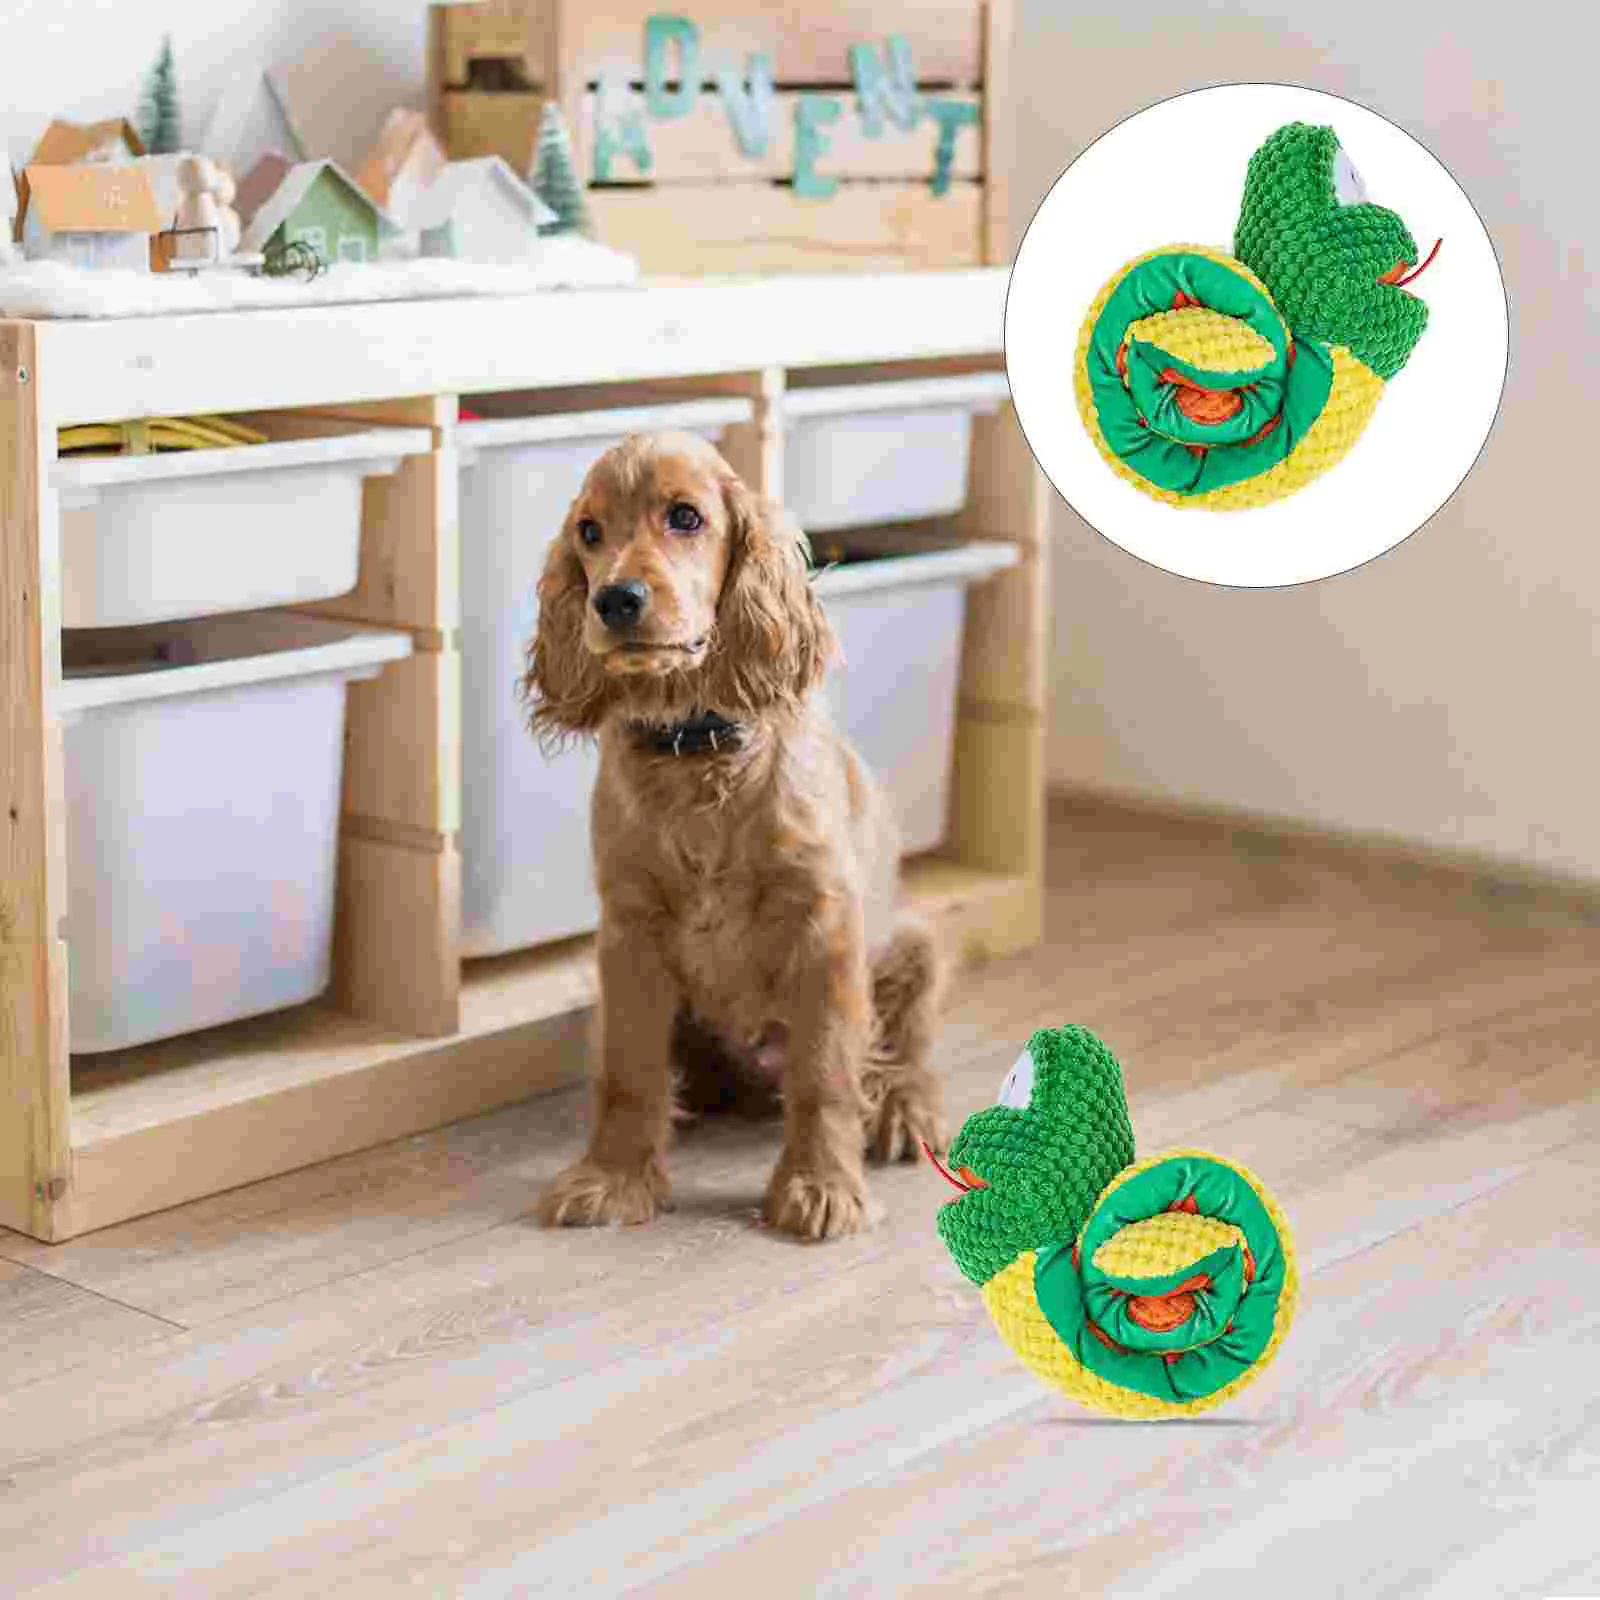 

Toys Dog Snuffle Toy Dogs Mat Snake Interactive Plush Squeaky Bowls Foraging Treat Chew Slow Game Educational Dispensing Feeder